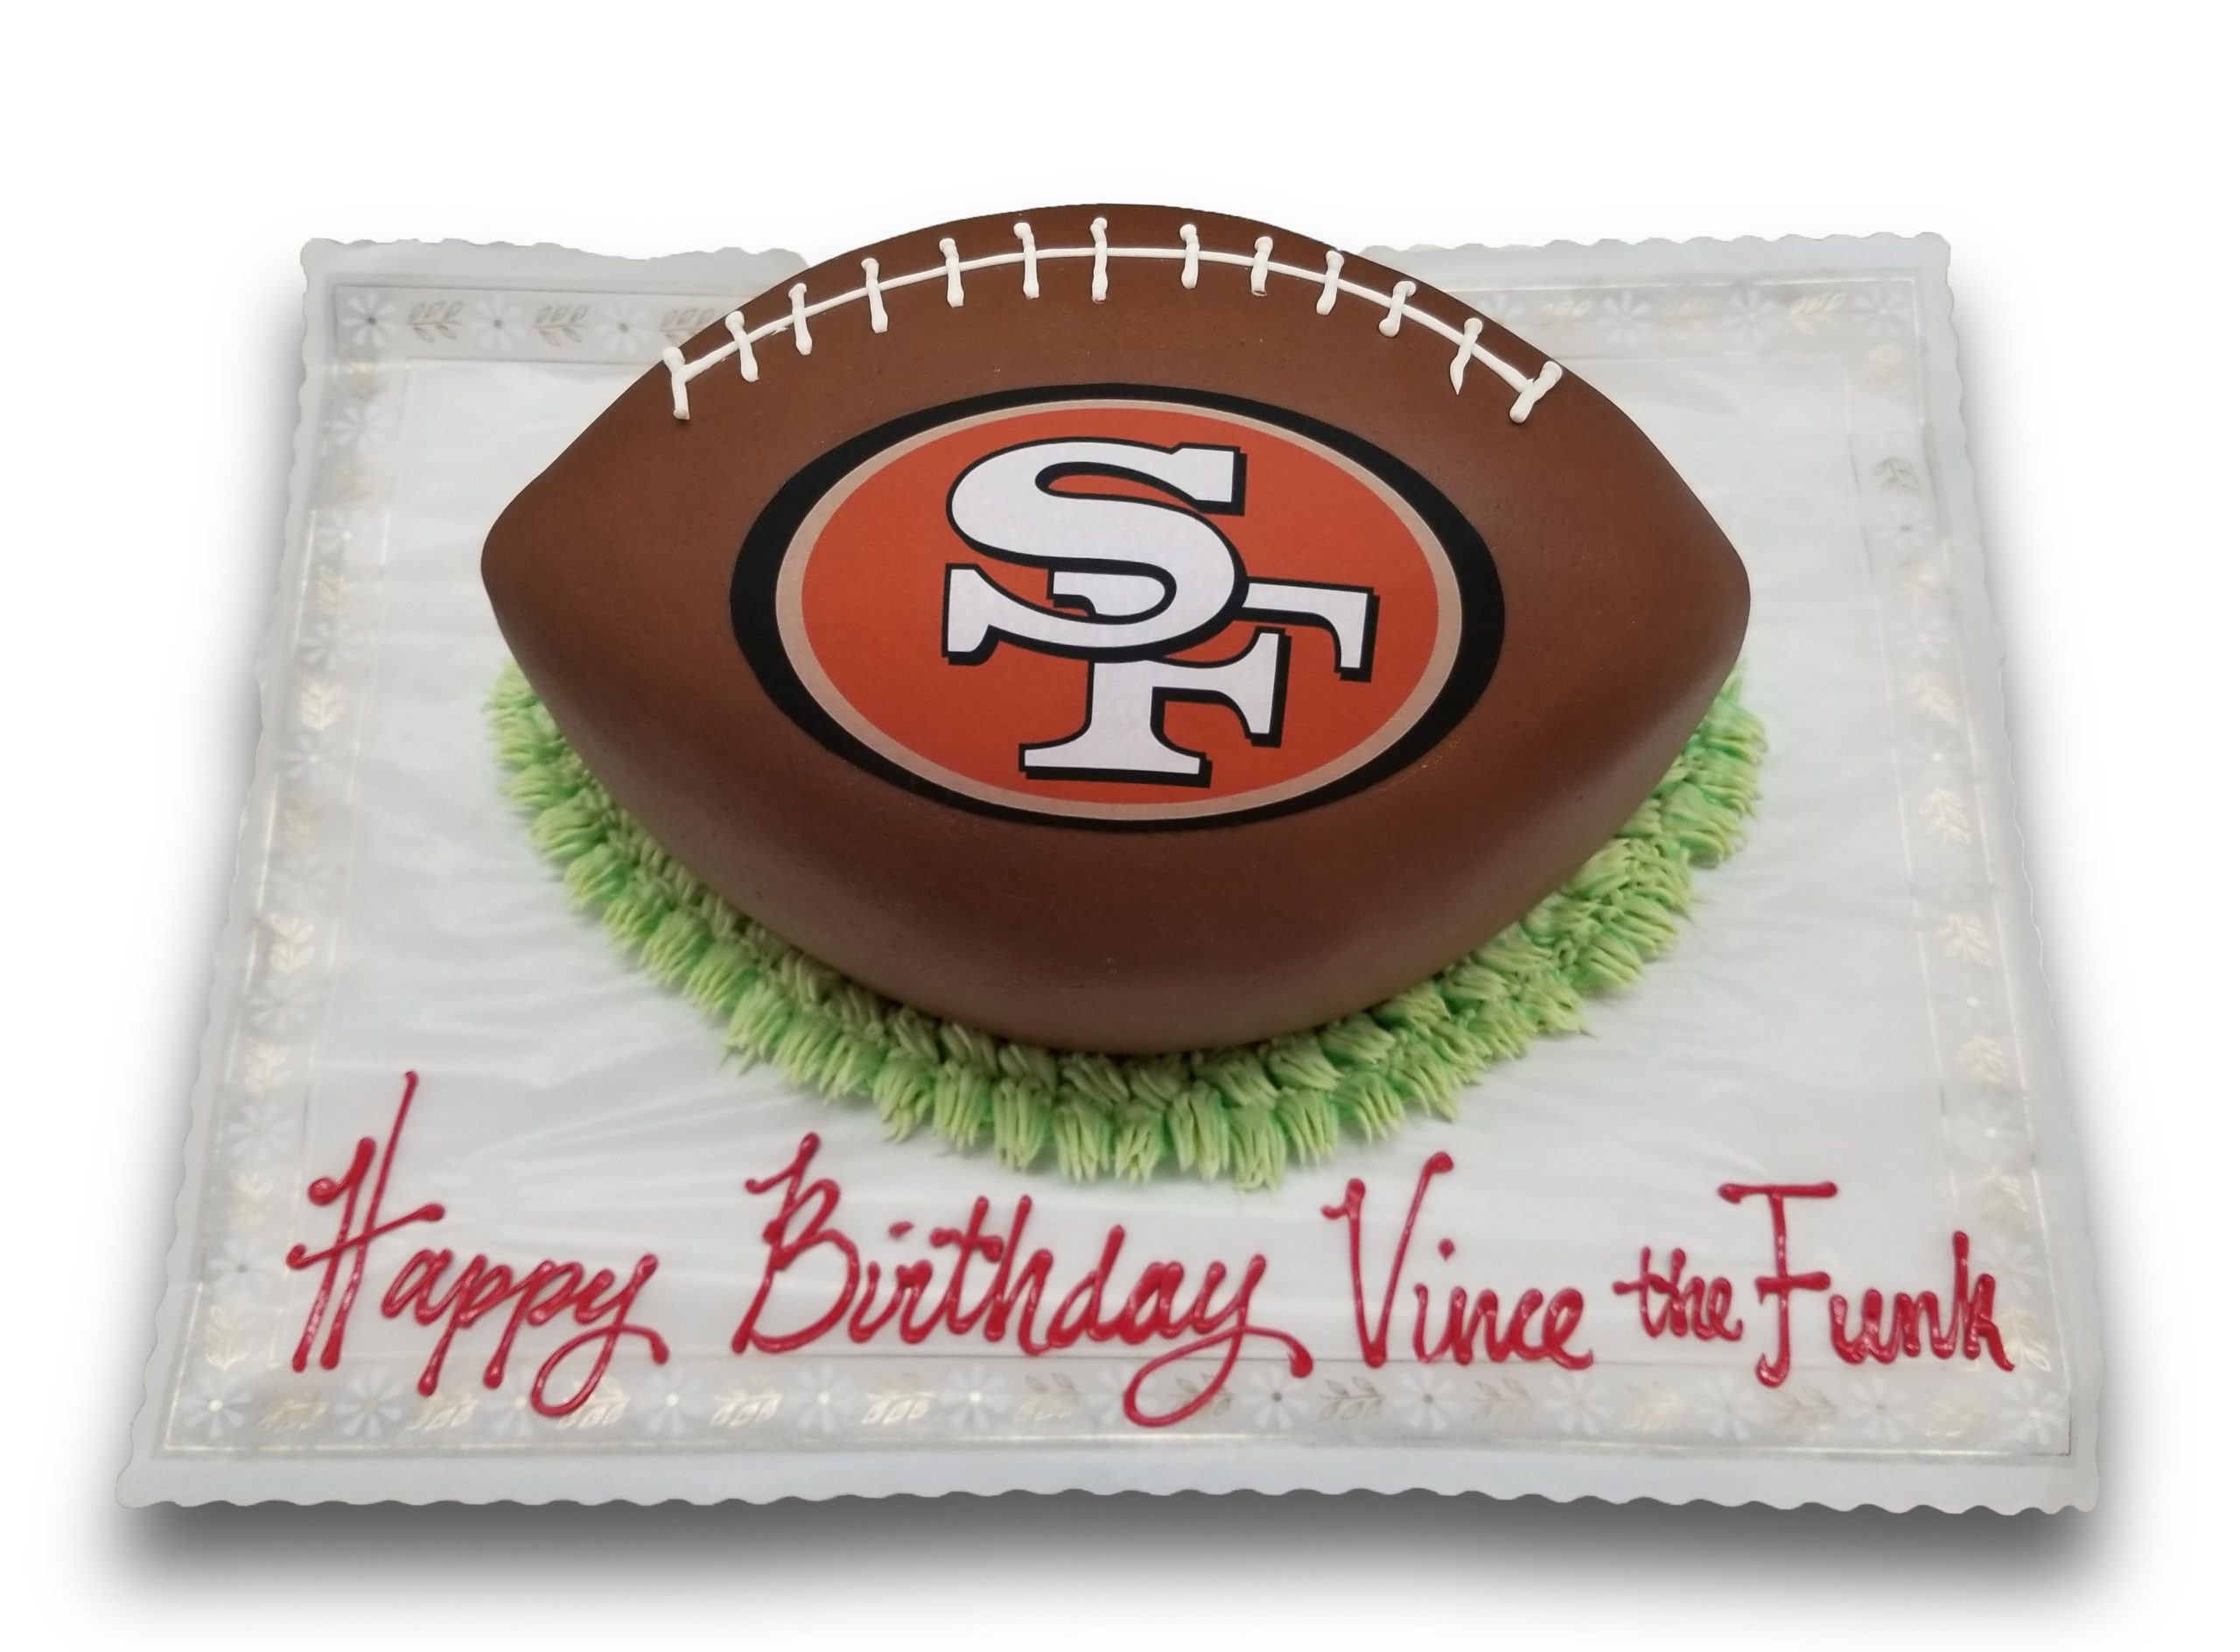 Football shaped fondant covered cake with 49ers scan 